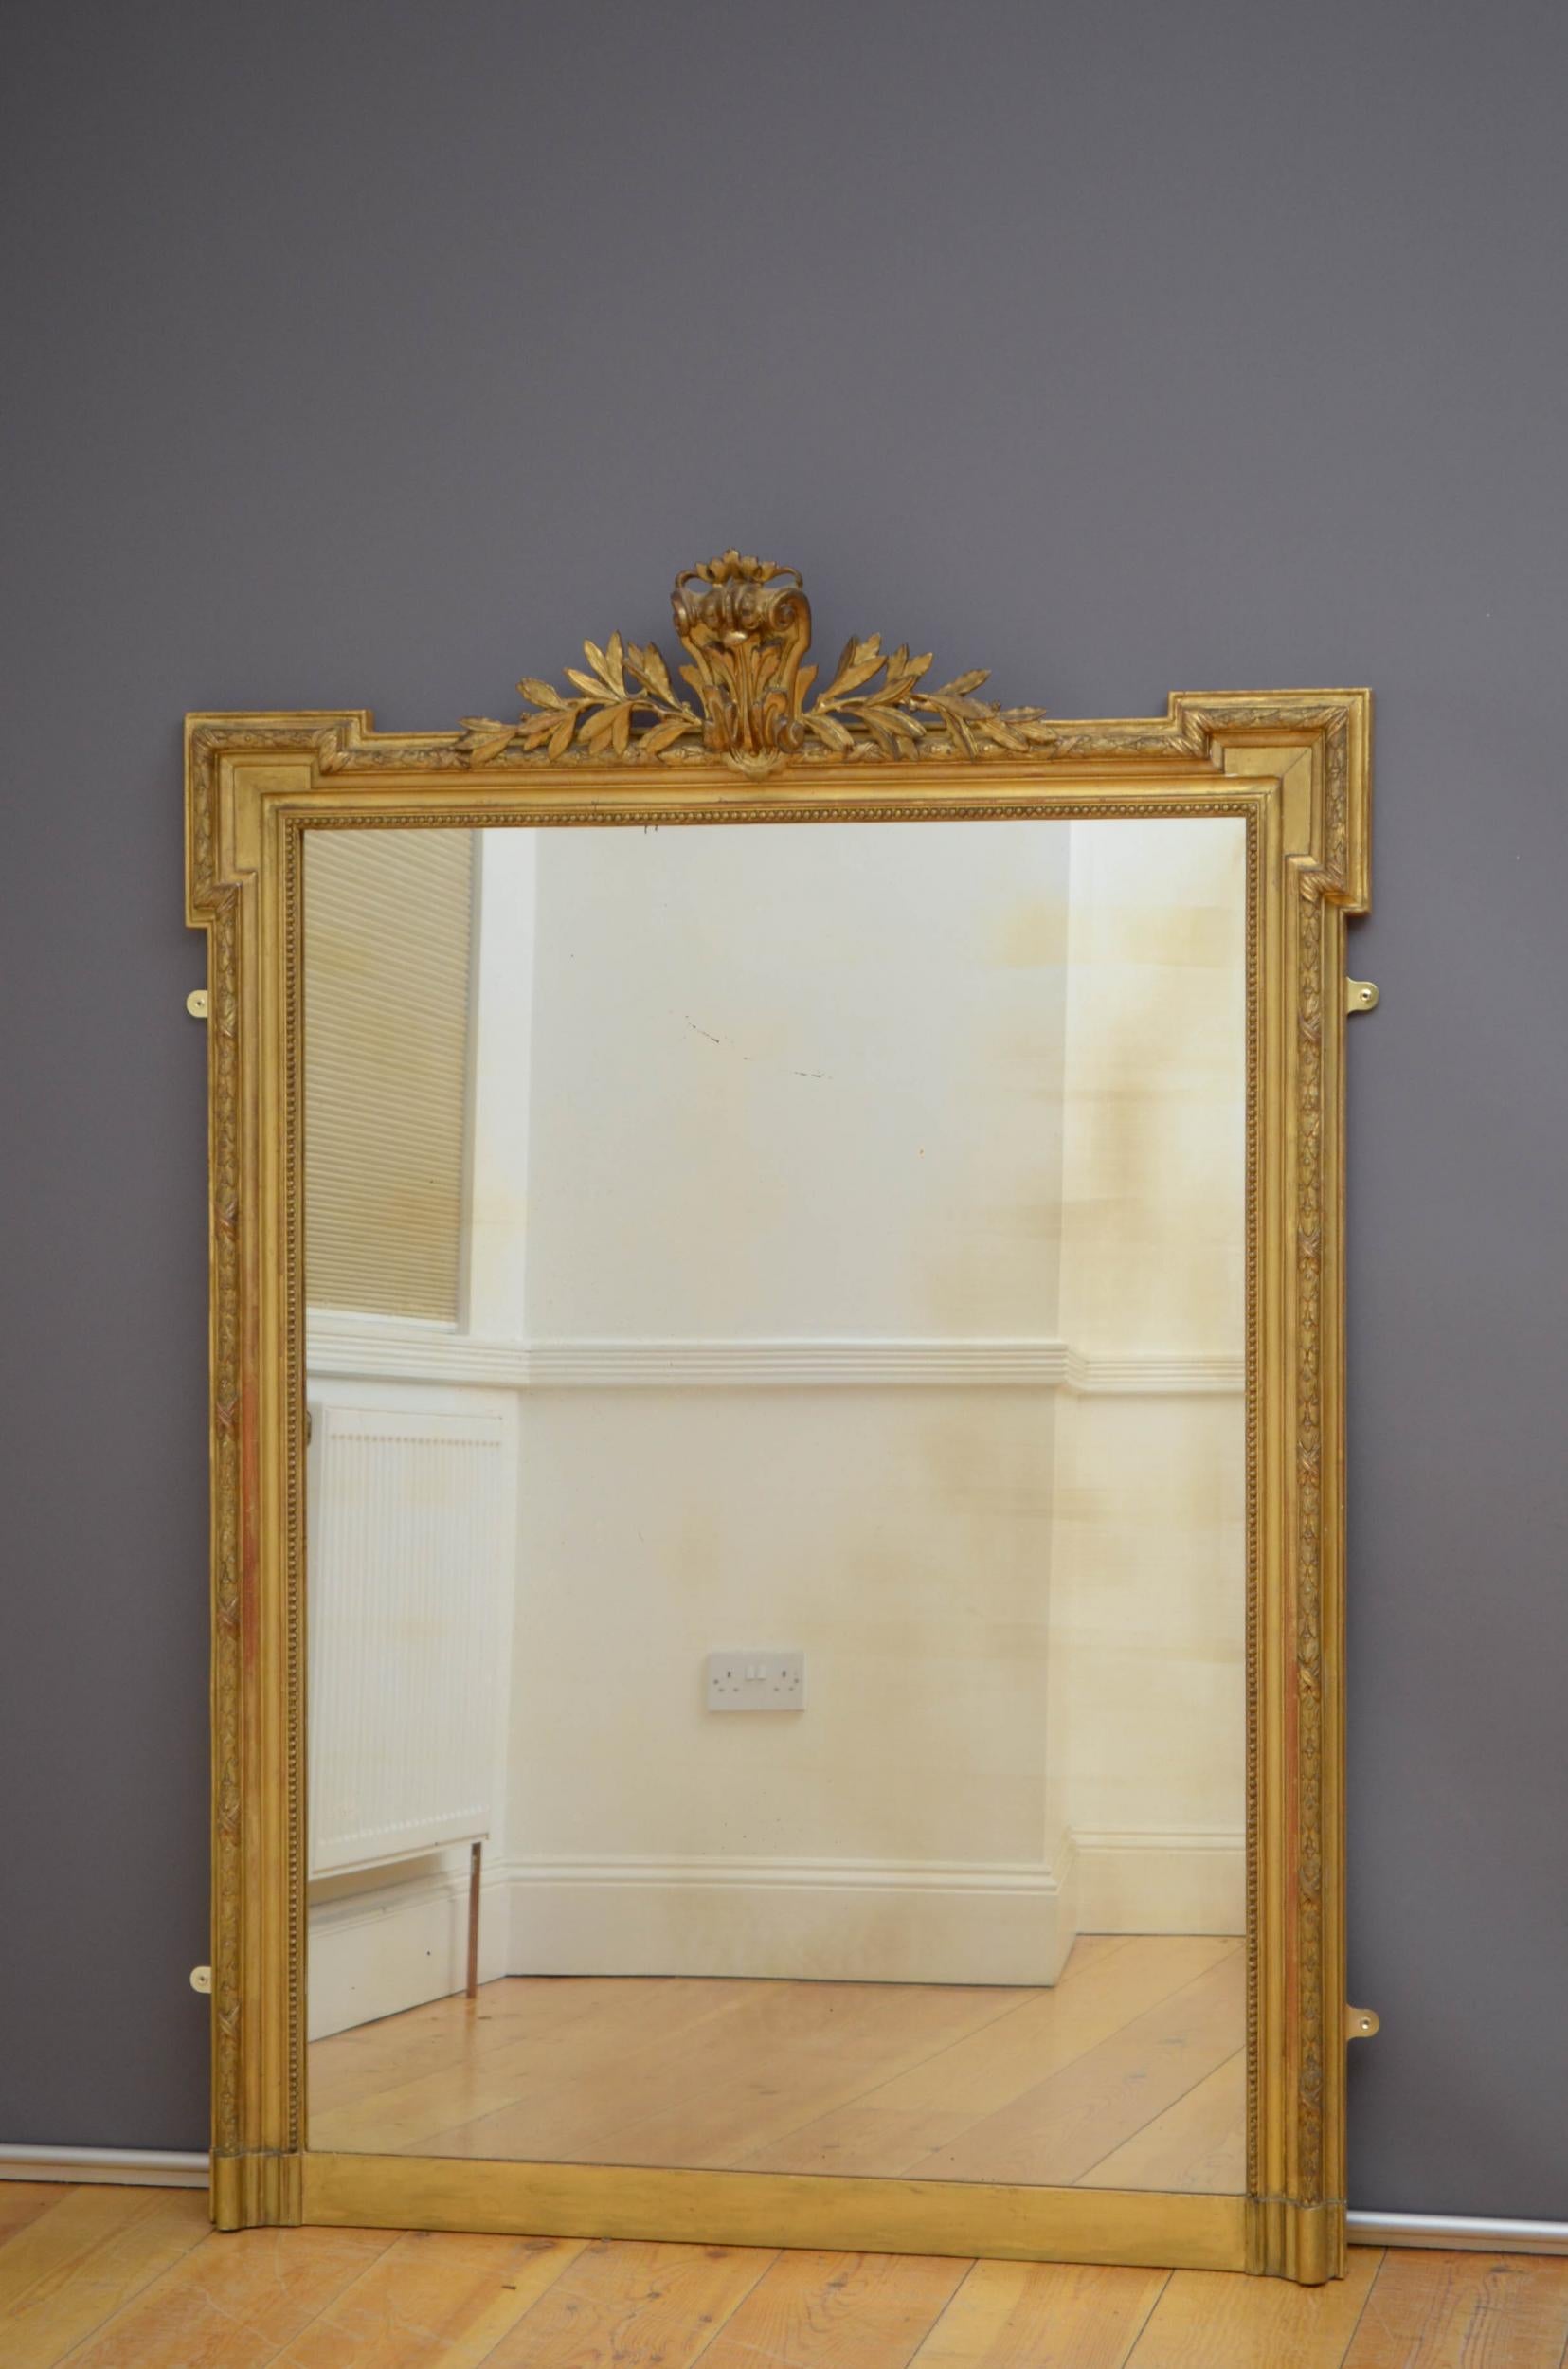 Sn4992 fine 19th century French gilded wall mirror, having original glass with some imperfections in moulded, beaded and gilded frame with flora centre crest and laurel decoration throughout. This antique mirror retains its original glass and